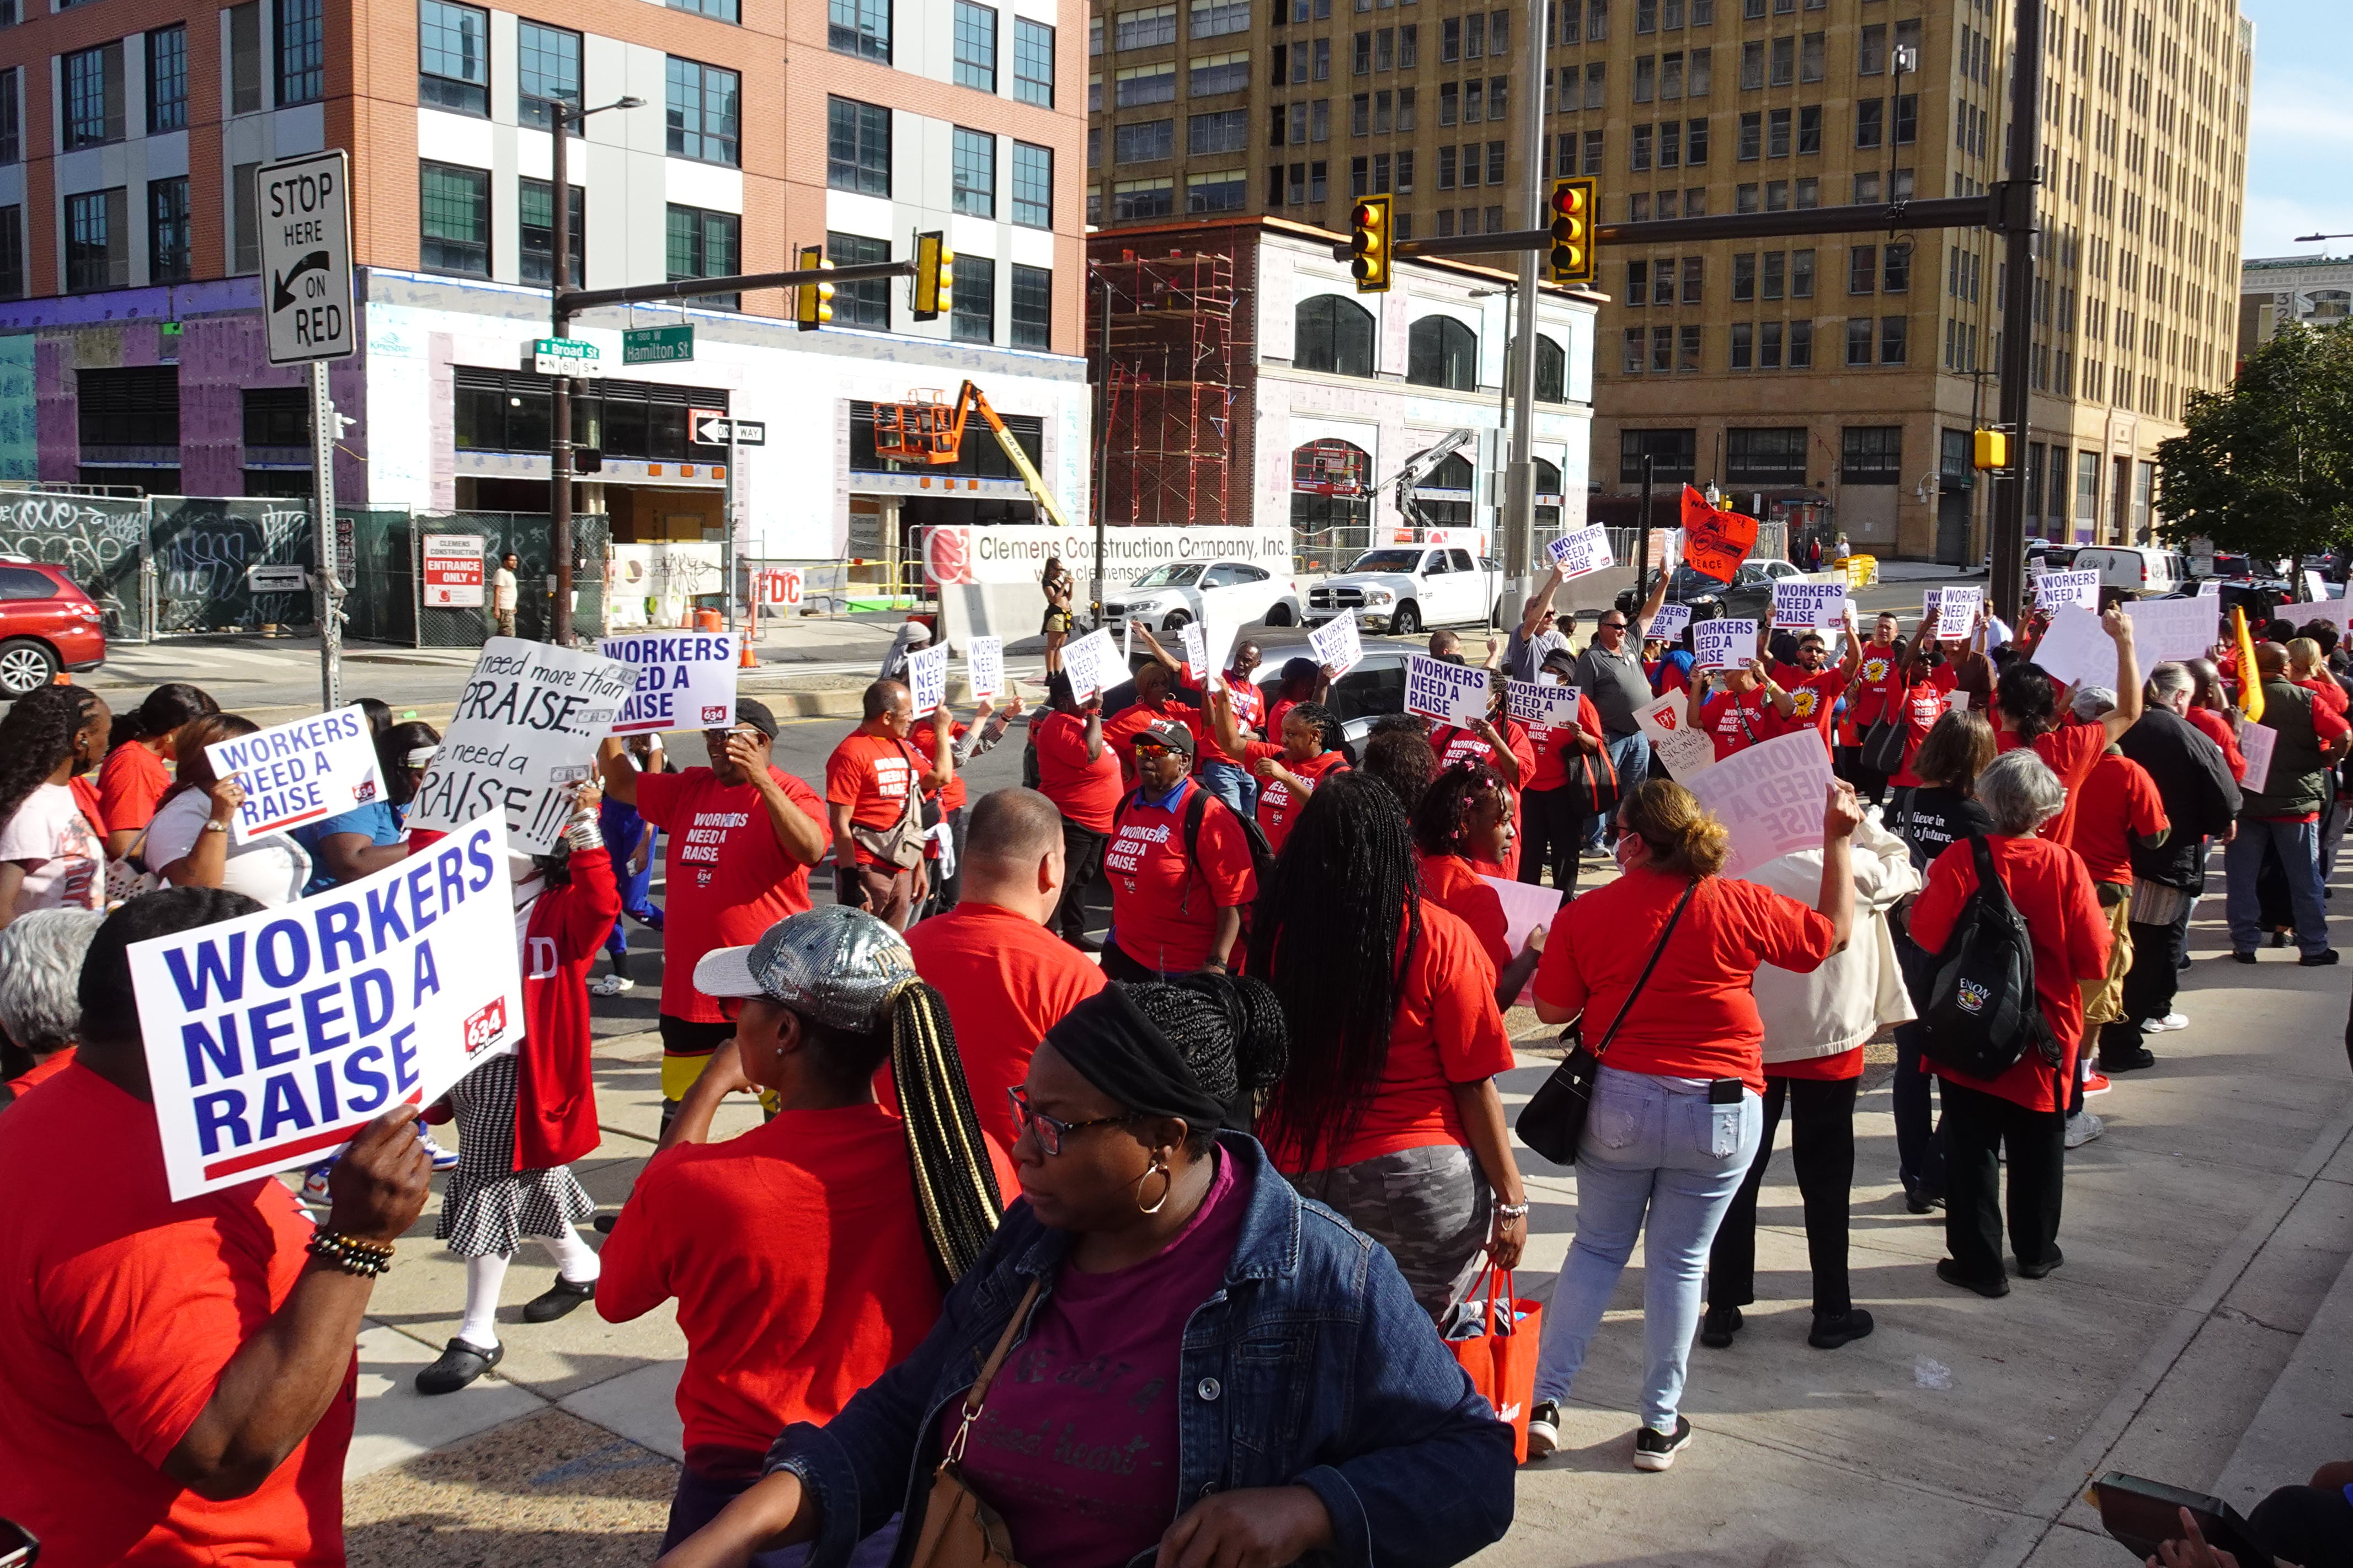 A group of people in red shirts march carrying signs that say “workers need a raise.”